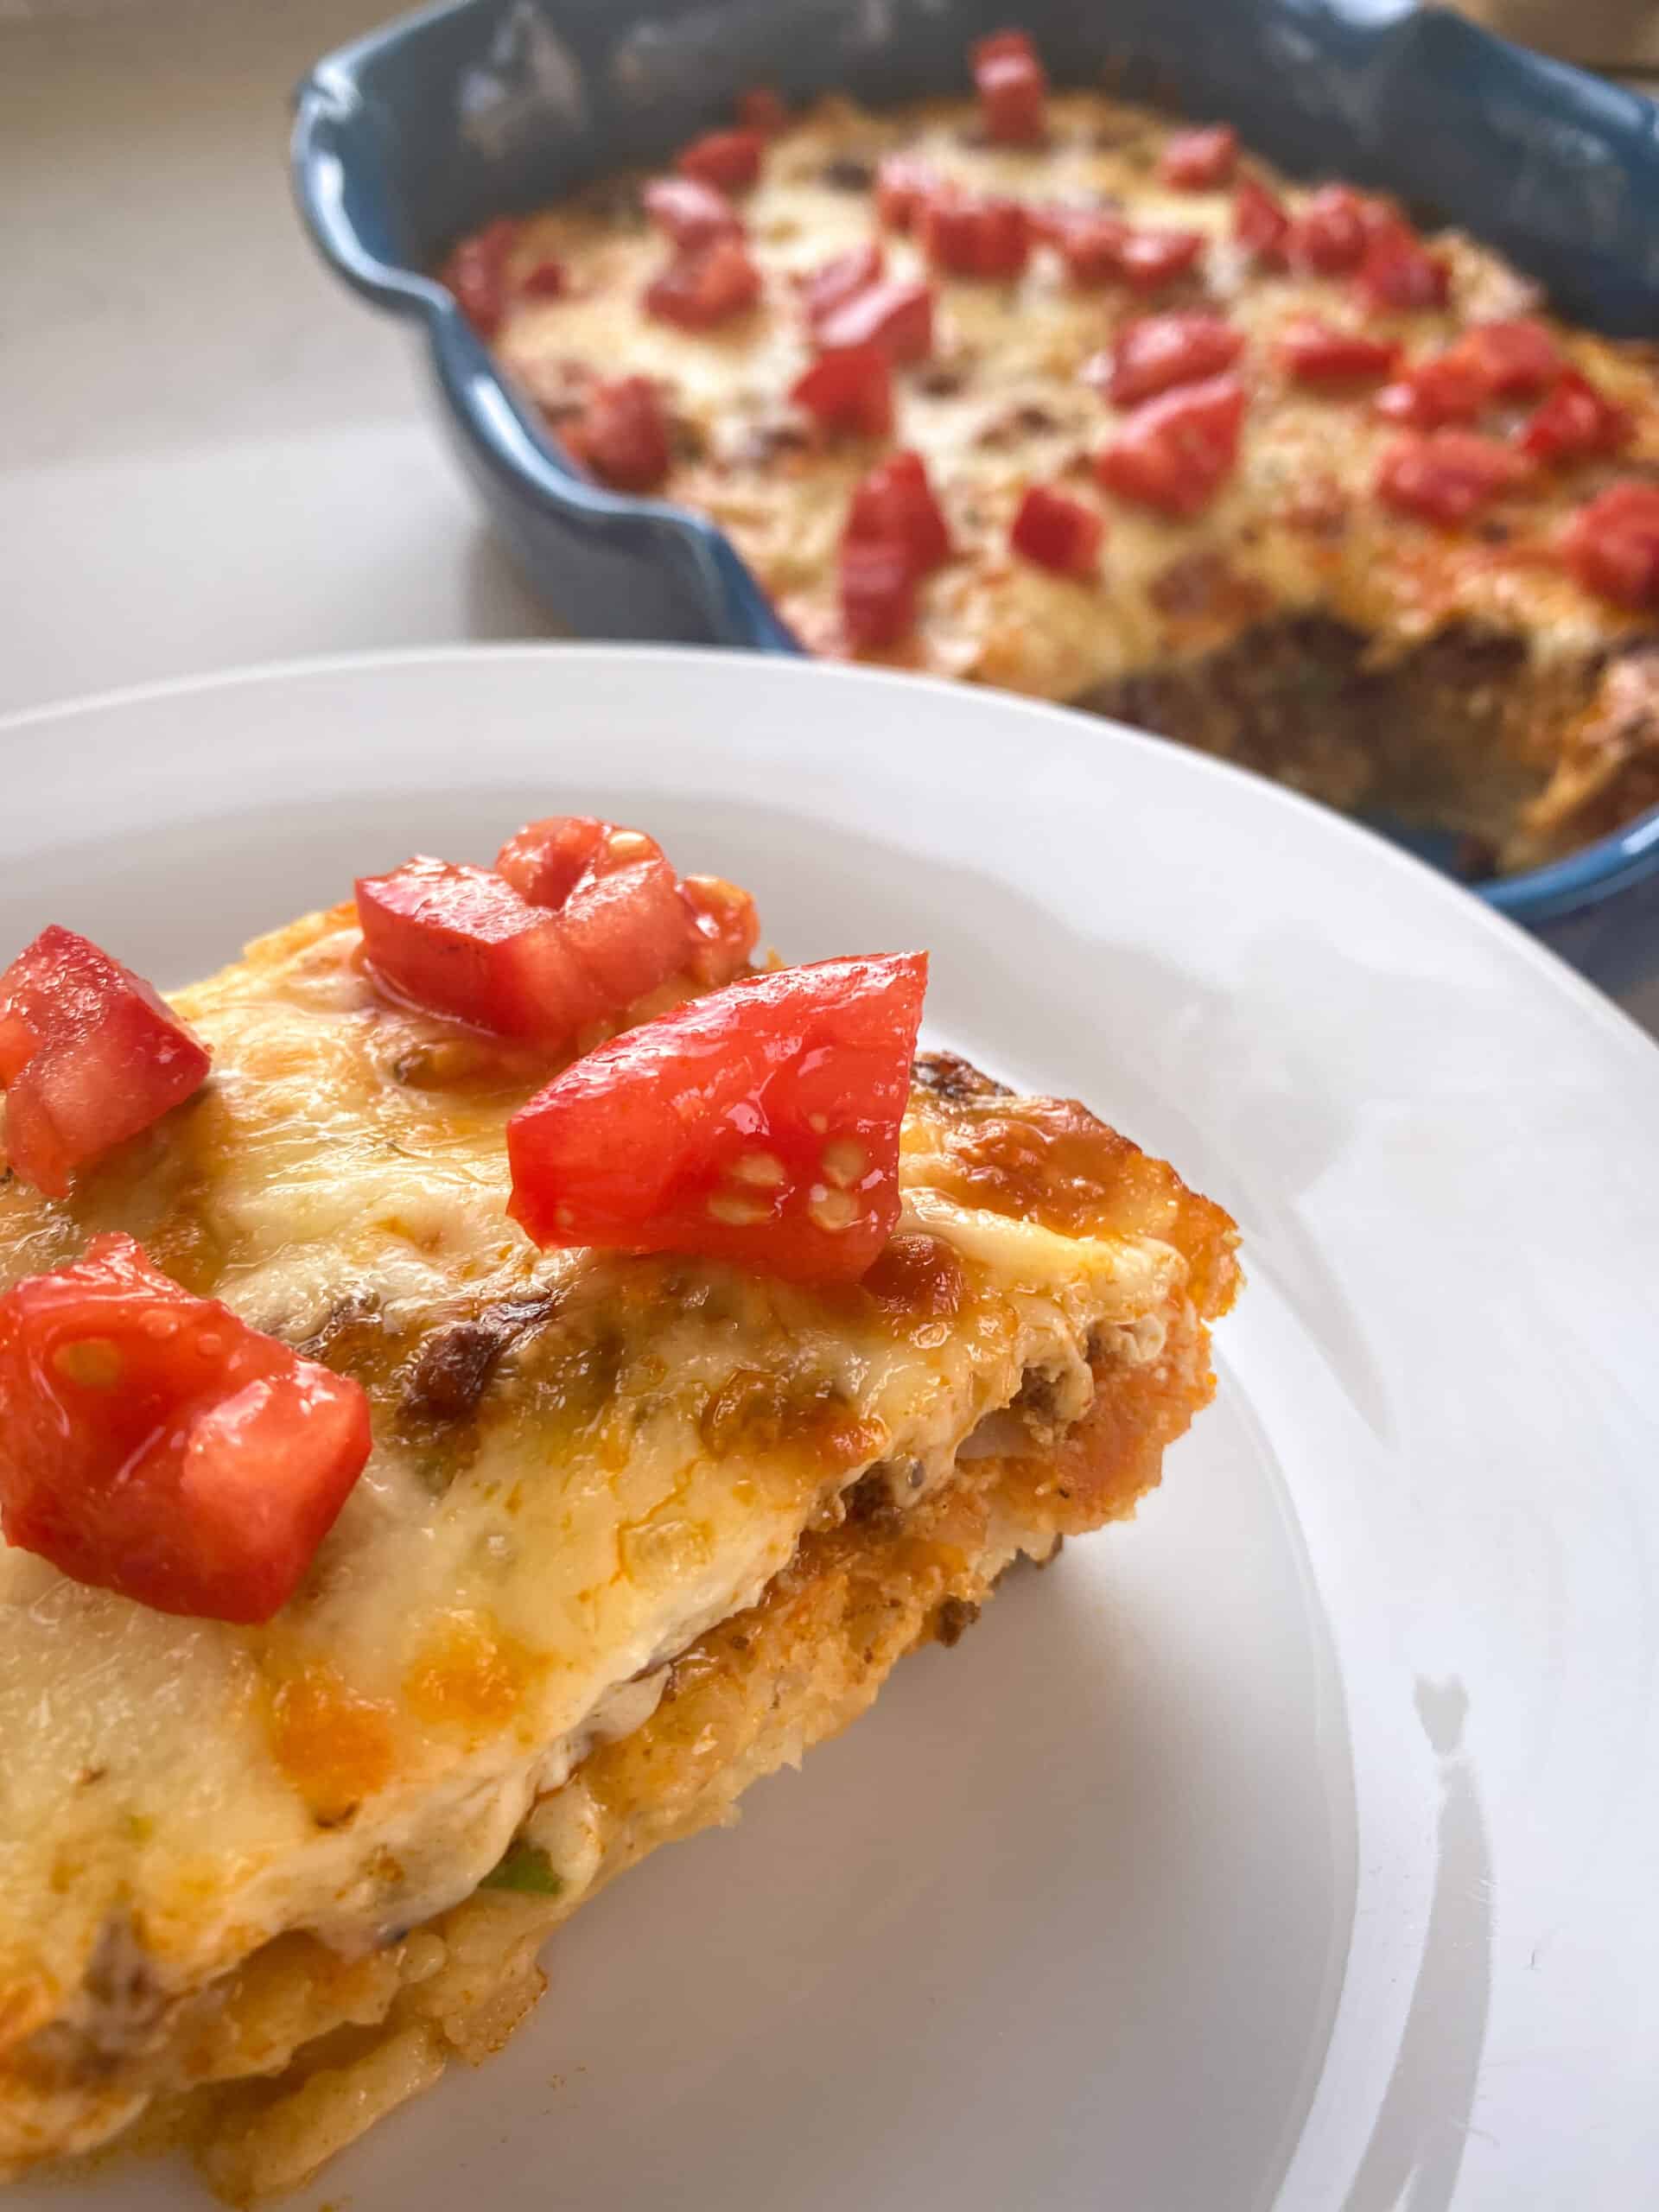 blue casserole dish with breakfast casserole and a white plate with a slice of the casserole topped with tomatoes